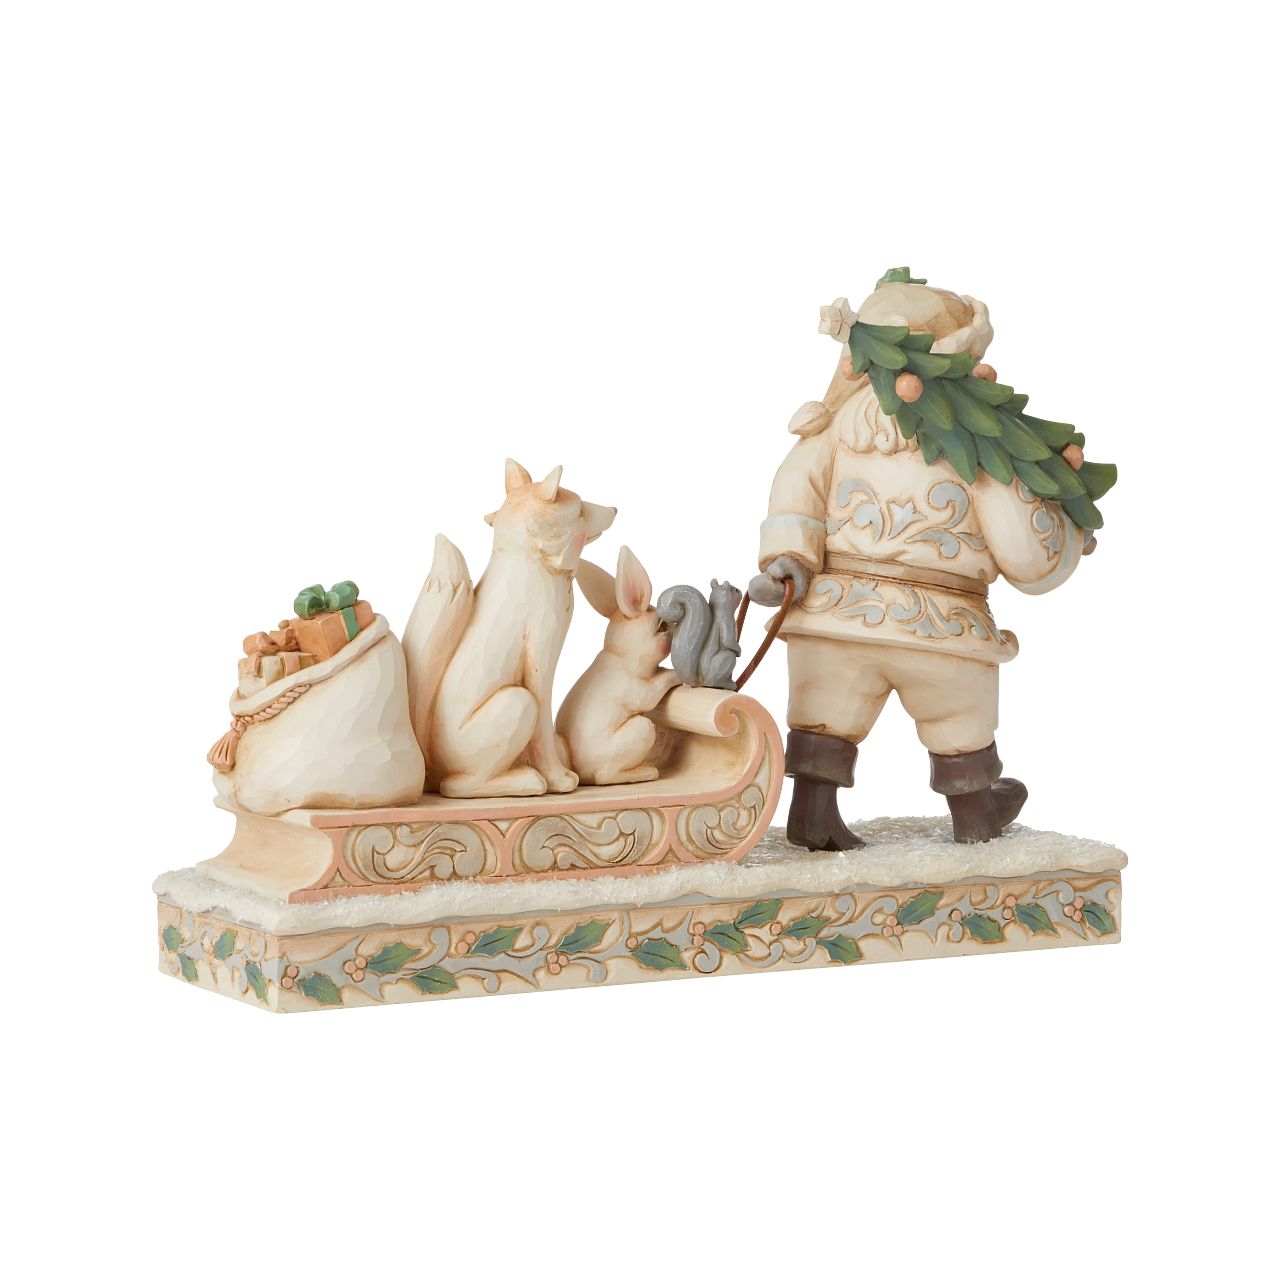 Jim Shore White Woodland Santa Pulling Sled Figurine  "A Wandering We Go" Santa is getting ready for Christmas with his furry friends. This piece features Santa dressed in the iconic, muted colours of White Woodland, whilst pulling a sled of forest animals and gifts.